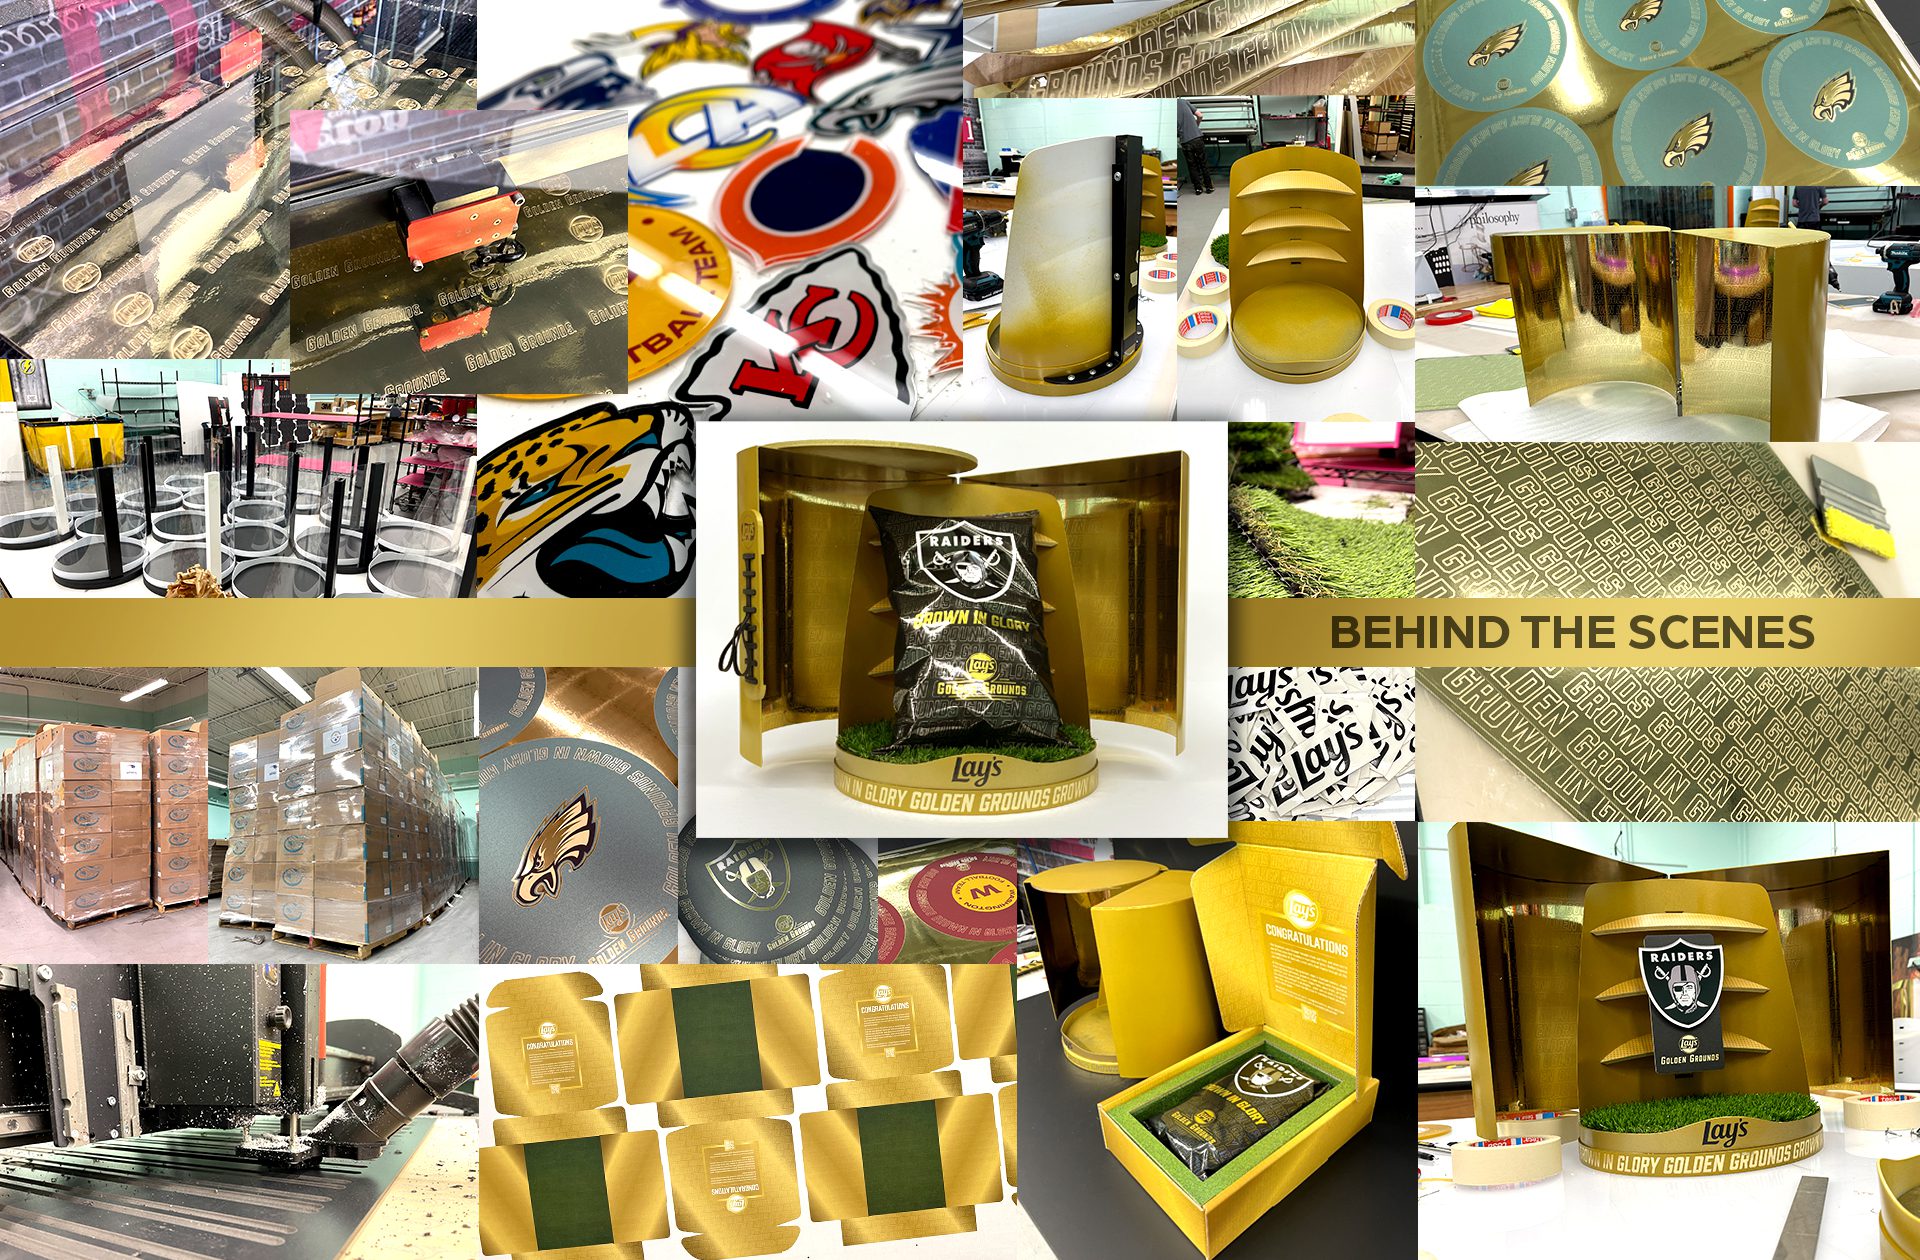 Collage of photographs from the production process for an influencer unboxing experience themed around fifferent NFL teams for Lays Golden Grounds.